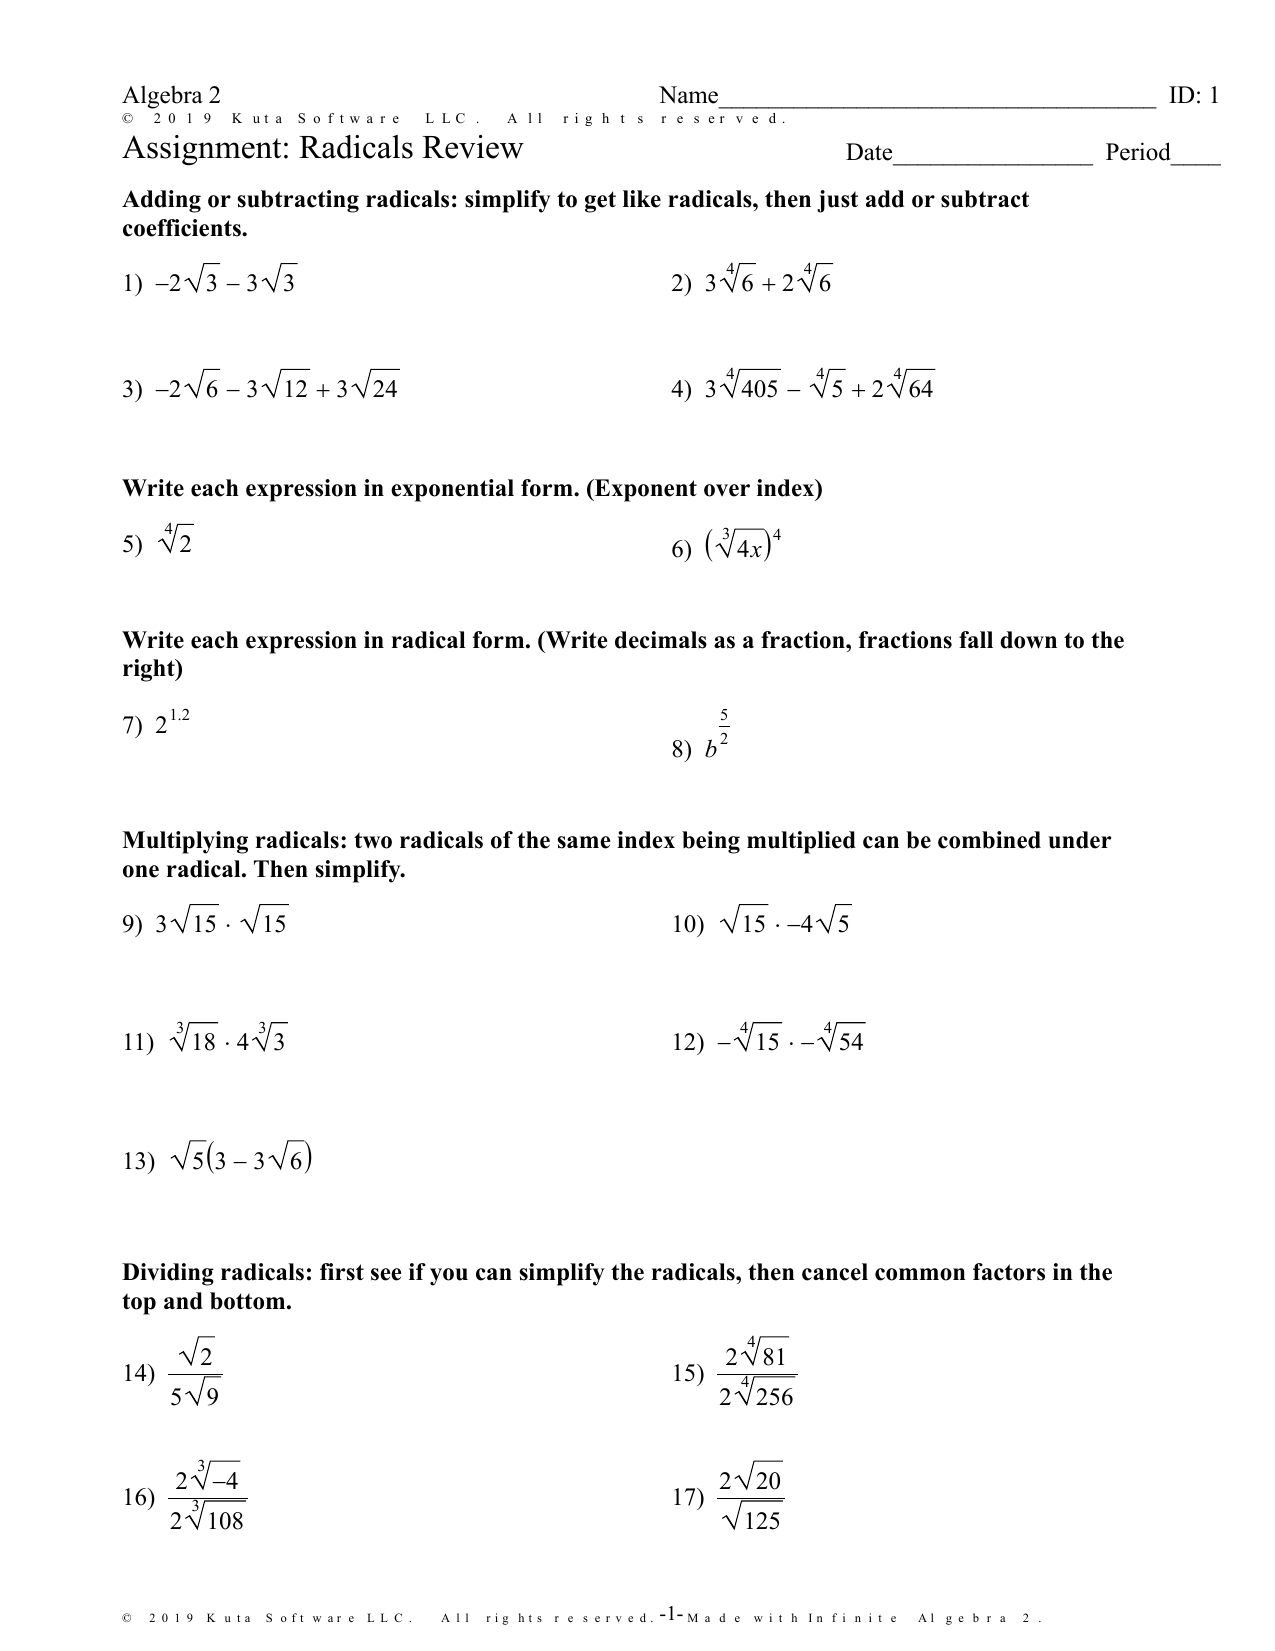 Radicals and Rational Exponents Review With Simplifying Radical Expressions Worksheet Answers